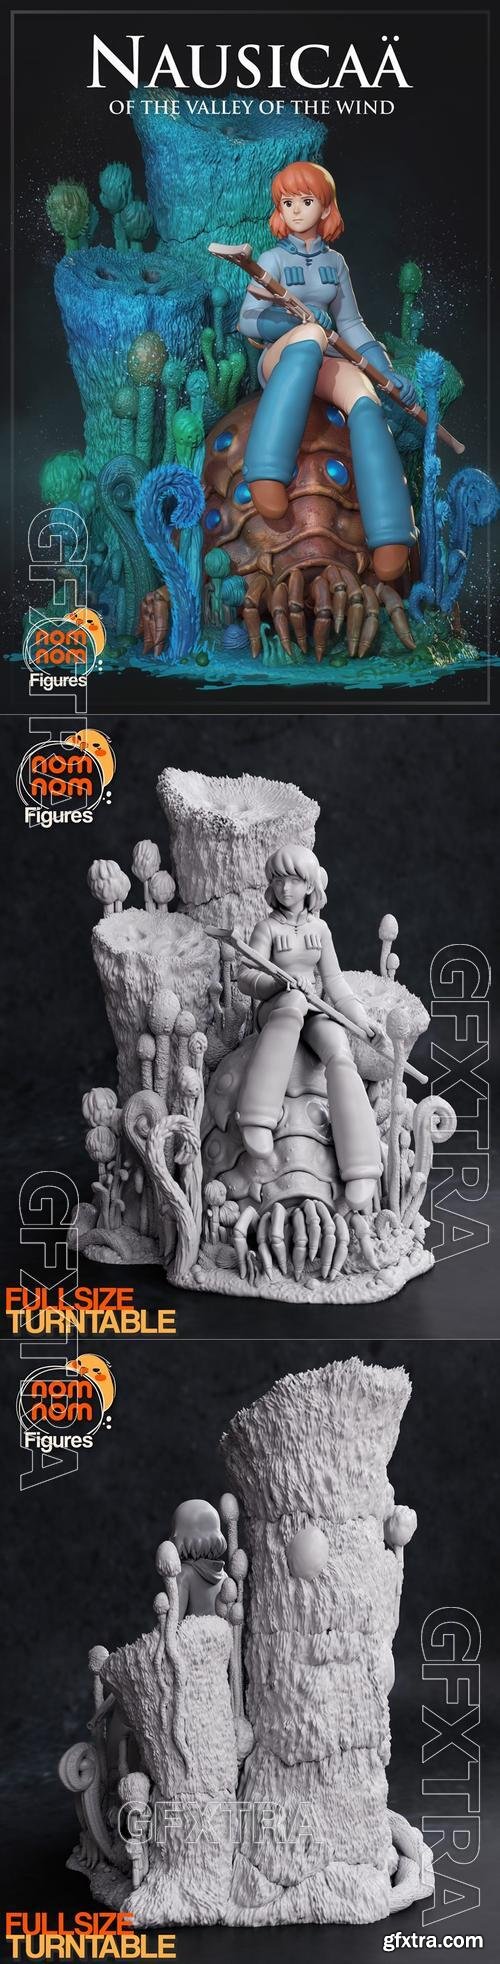 Nomnom Figures - Nausica form the Valley of the Wind – 3D Print Model